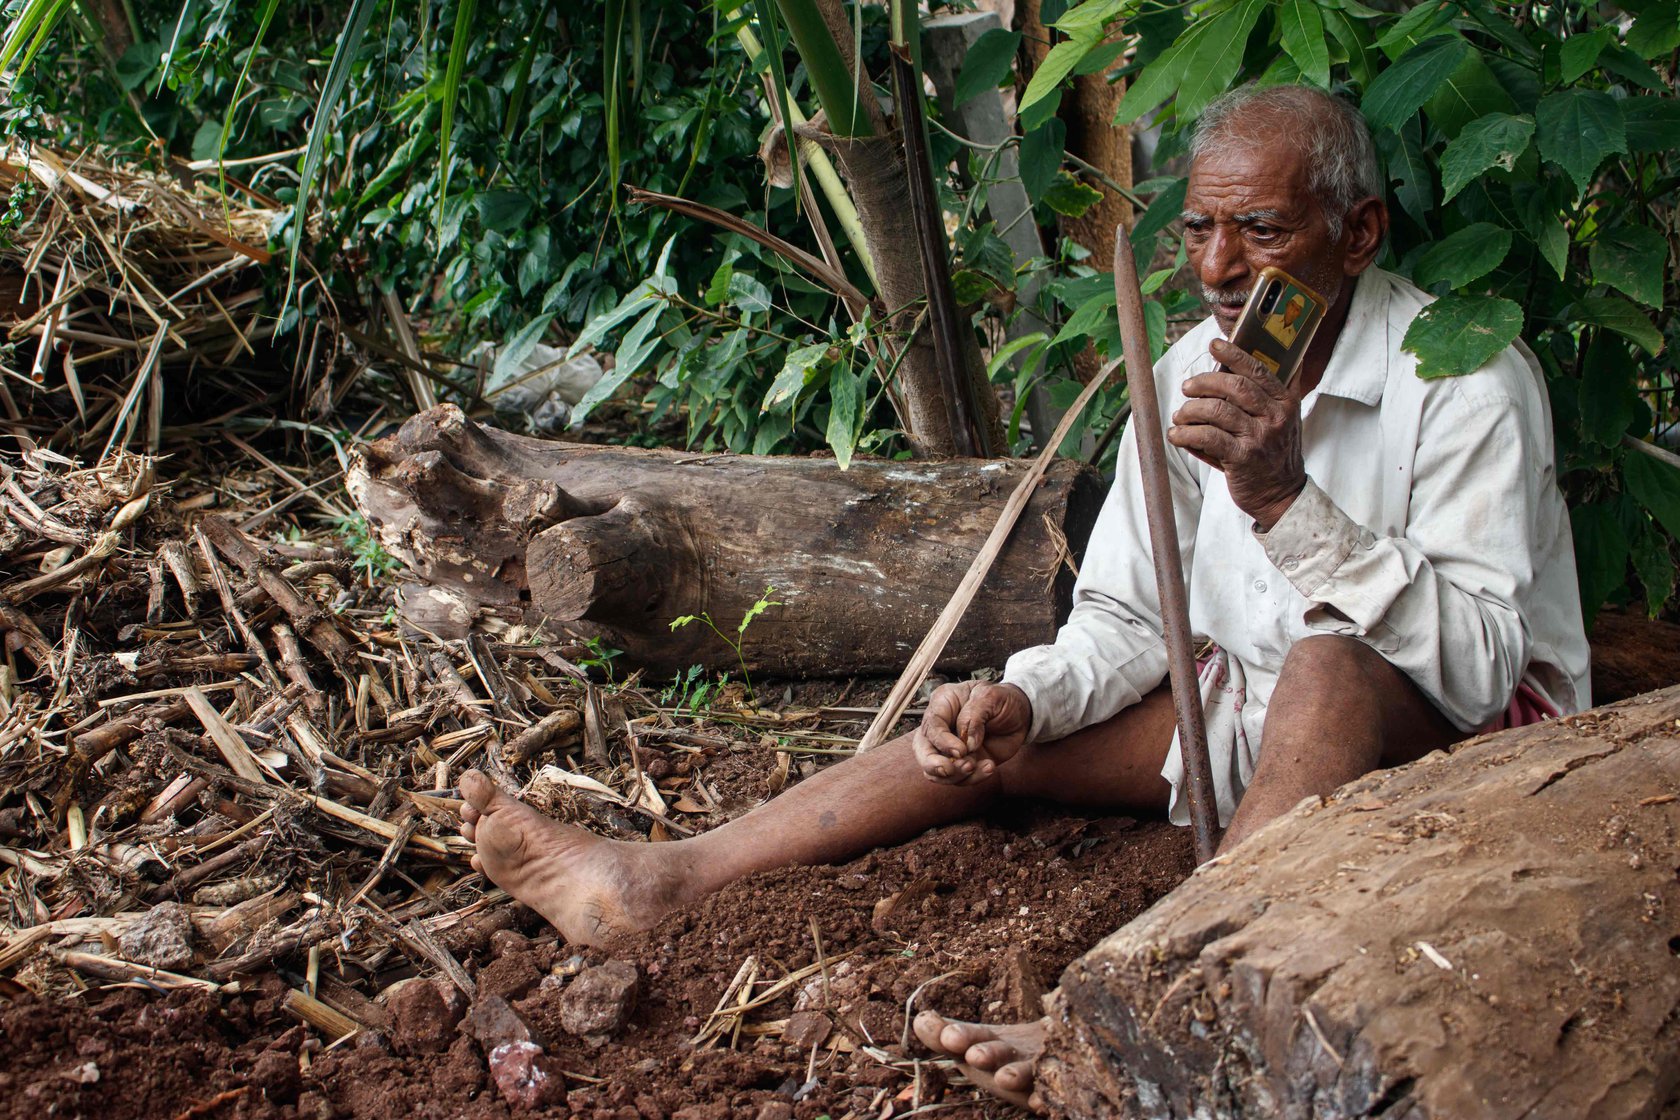 Narayan Gaikwad attending a call on his mobile while digging holes for the jhopdi